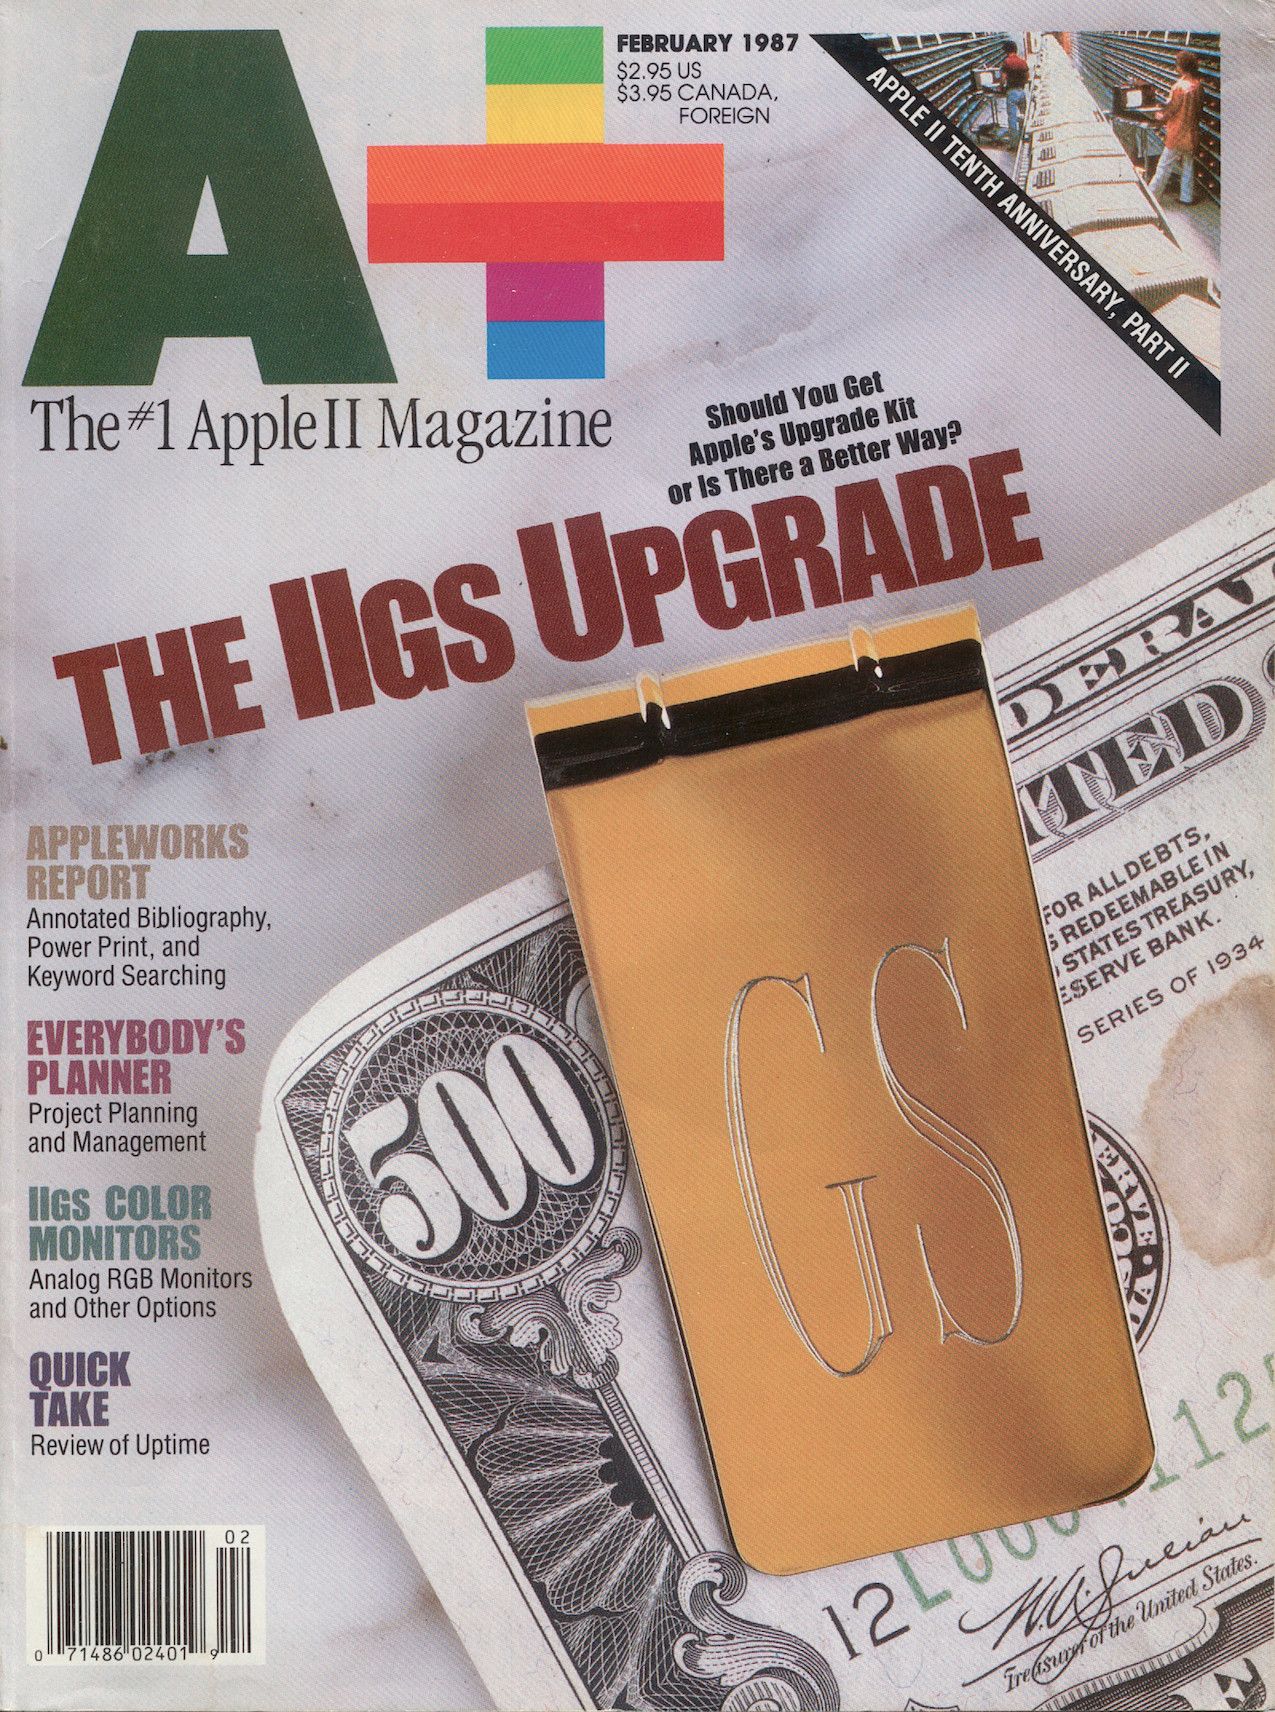 A+ Feb 1987 cover story Apple IIGS Upgrade Kit - cover copy.jpg